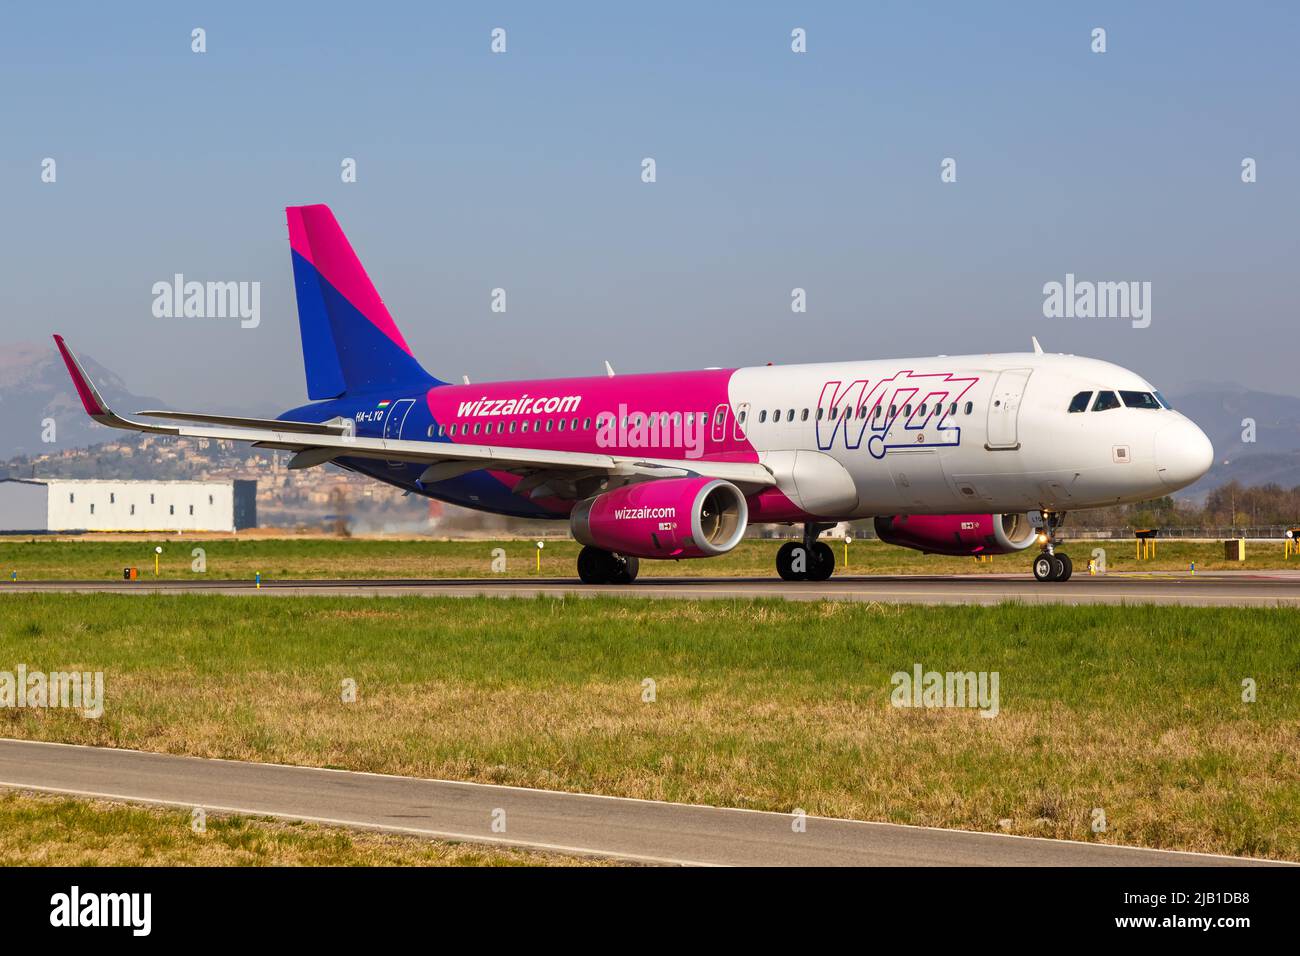 Bergamo, Italy - March 25, 2022: Wizzair Airbus A320 airplane at Bergamo airport (BGY) in Italy. Stock Photo